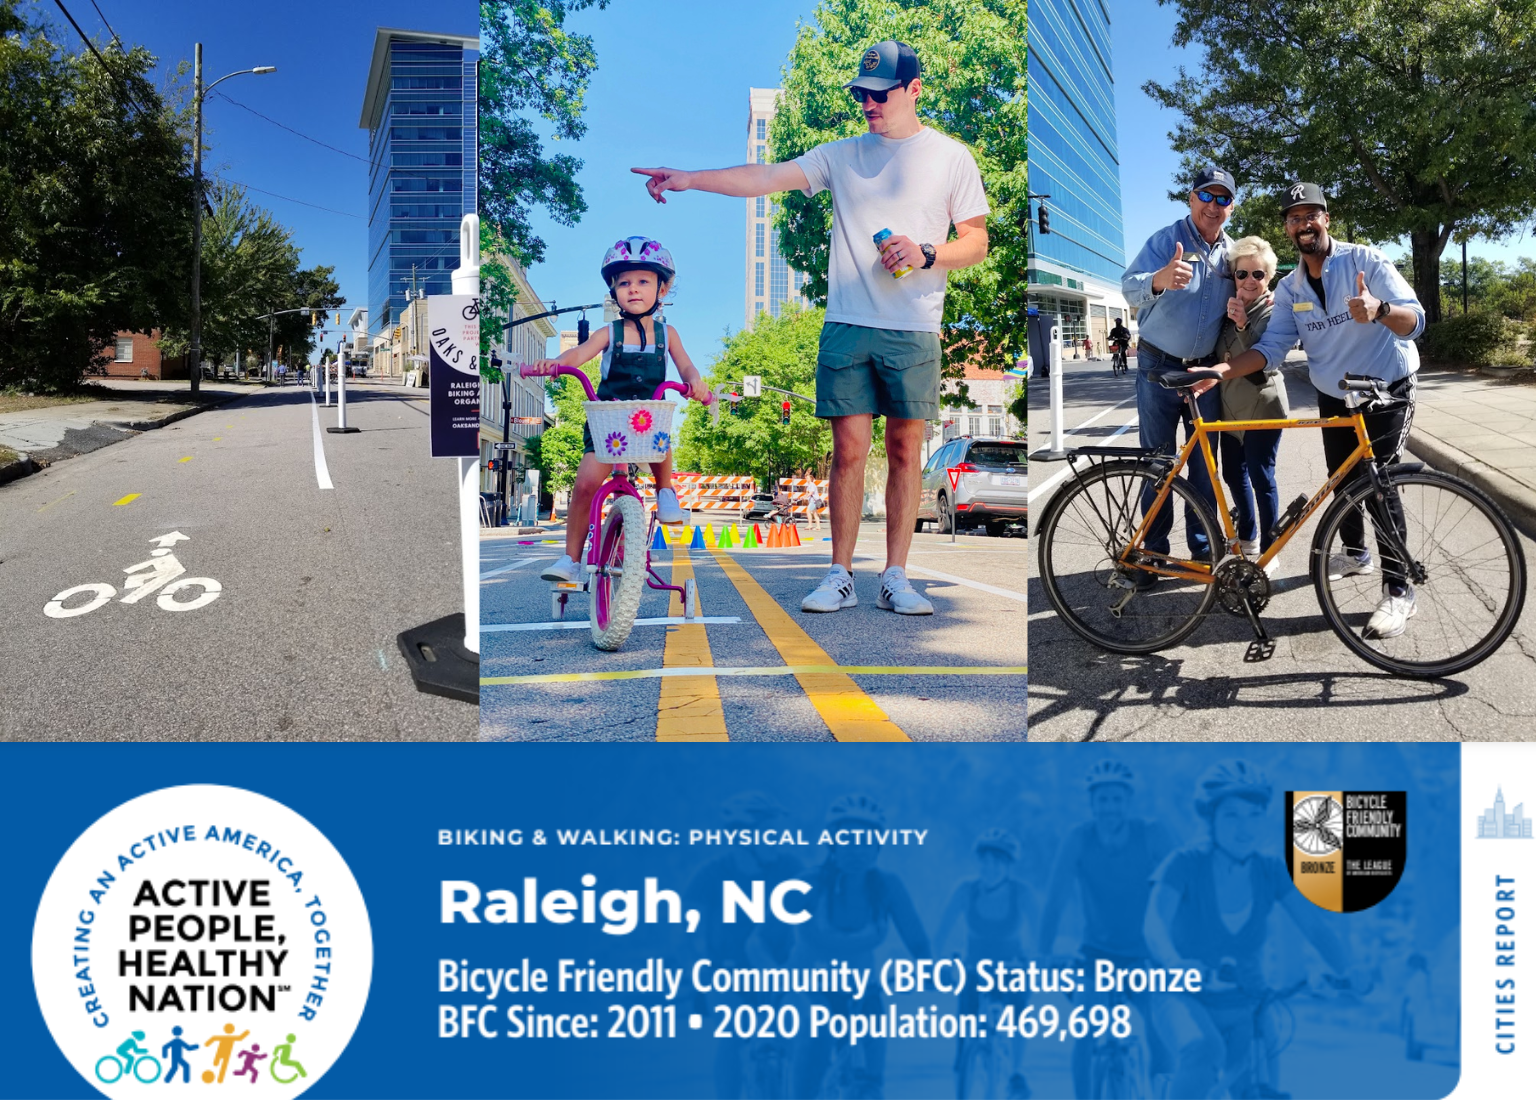 American Bicyclist eNews: State and City Fact Sheet on Raleigh